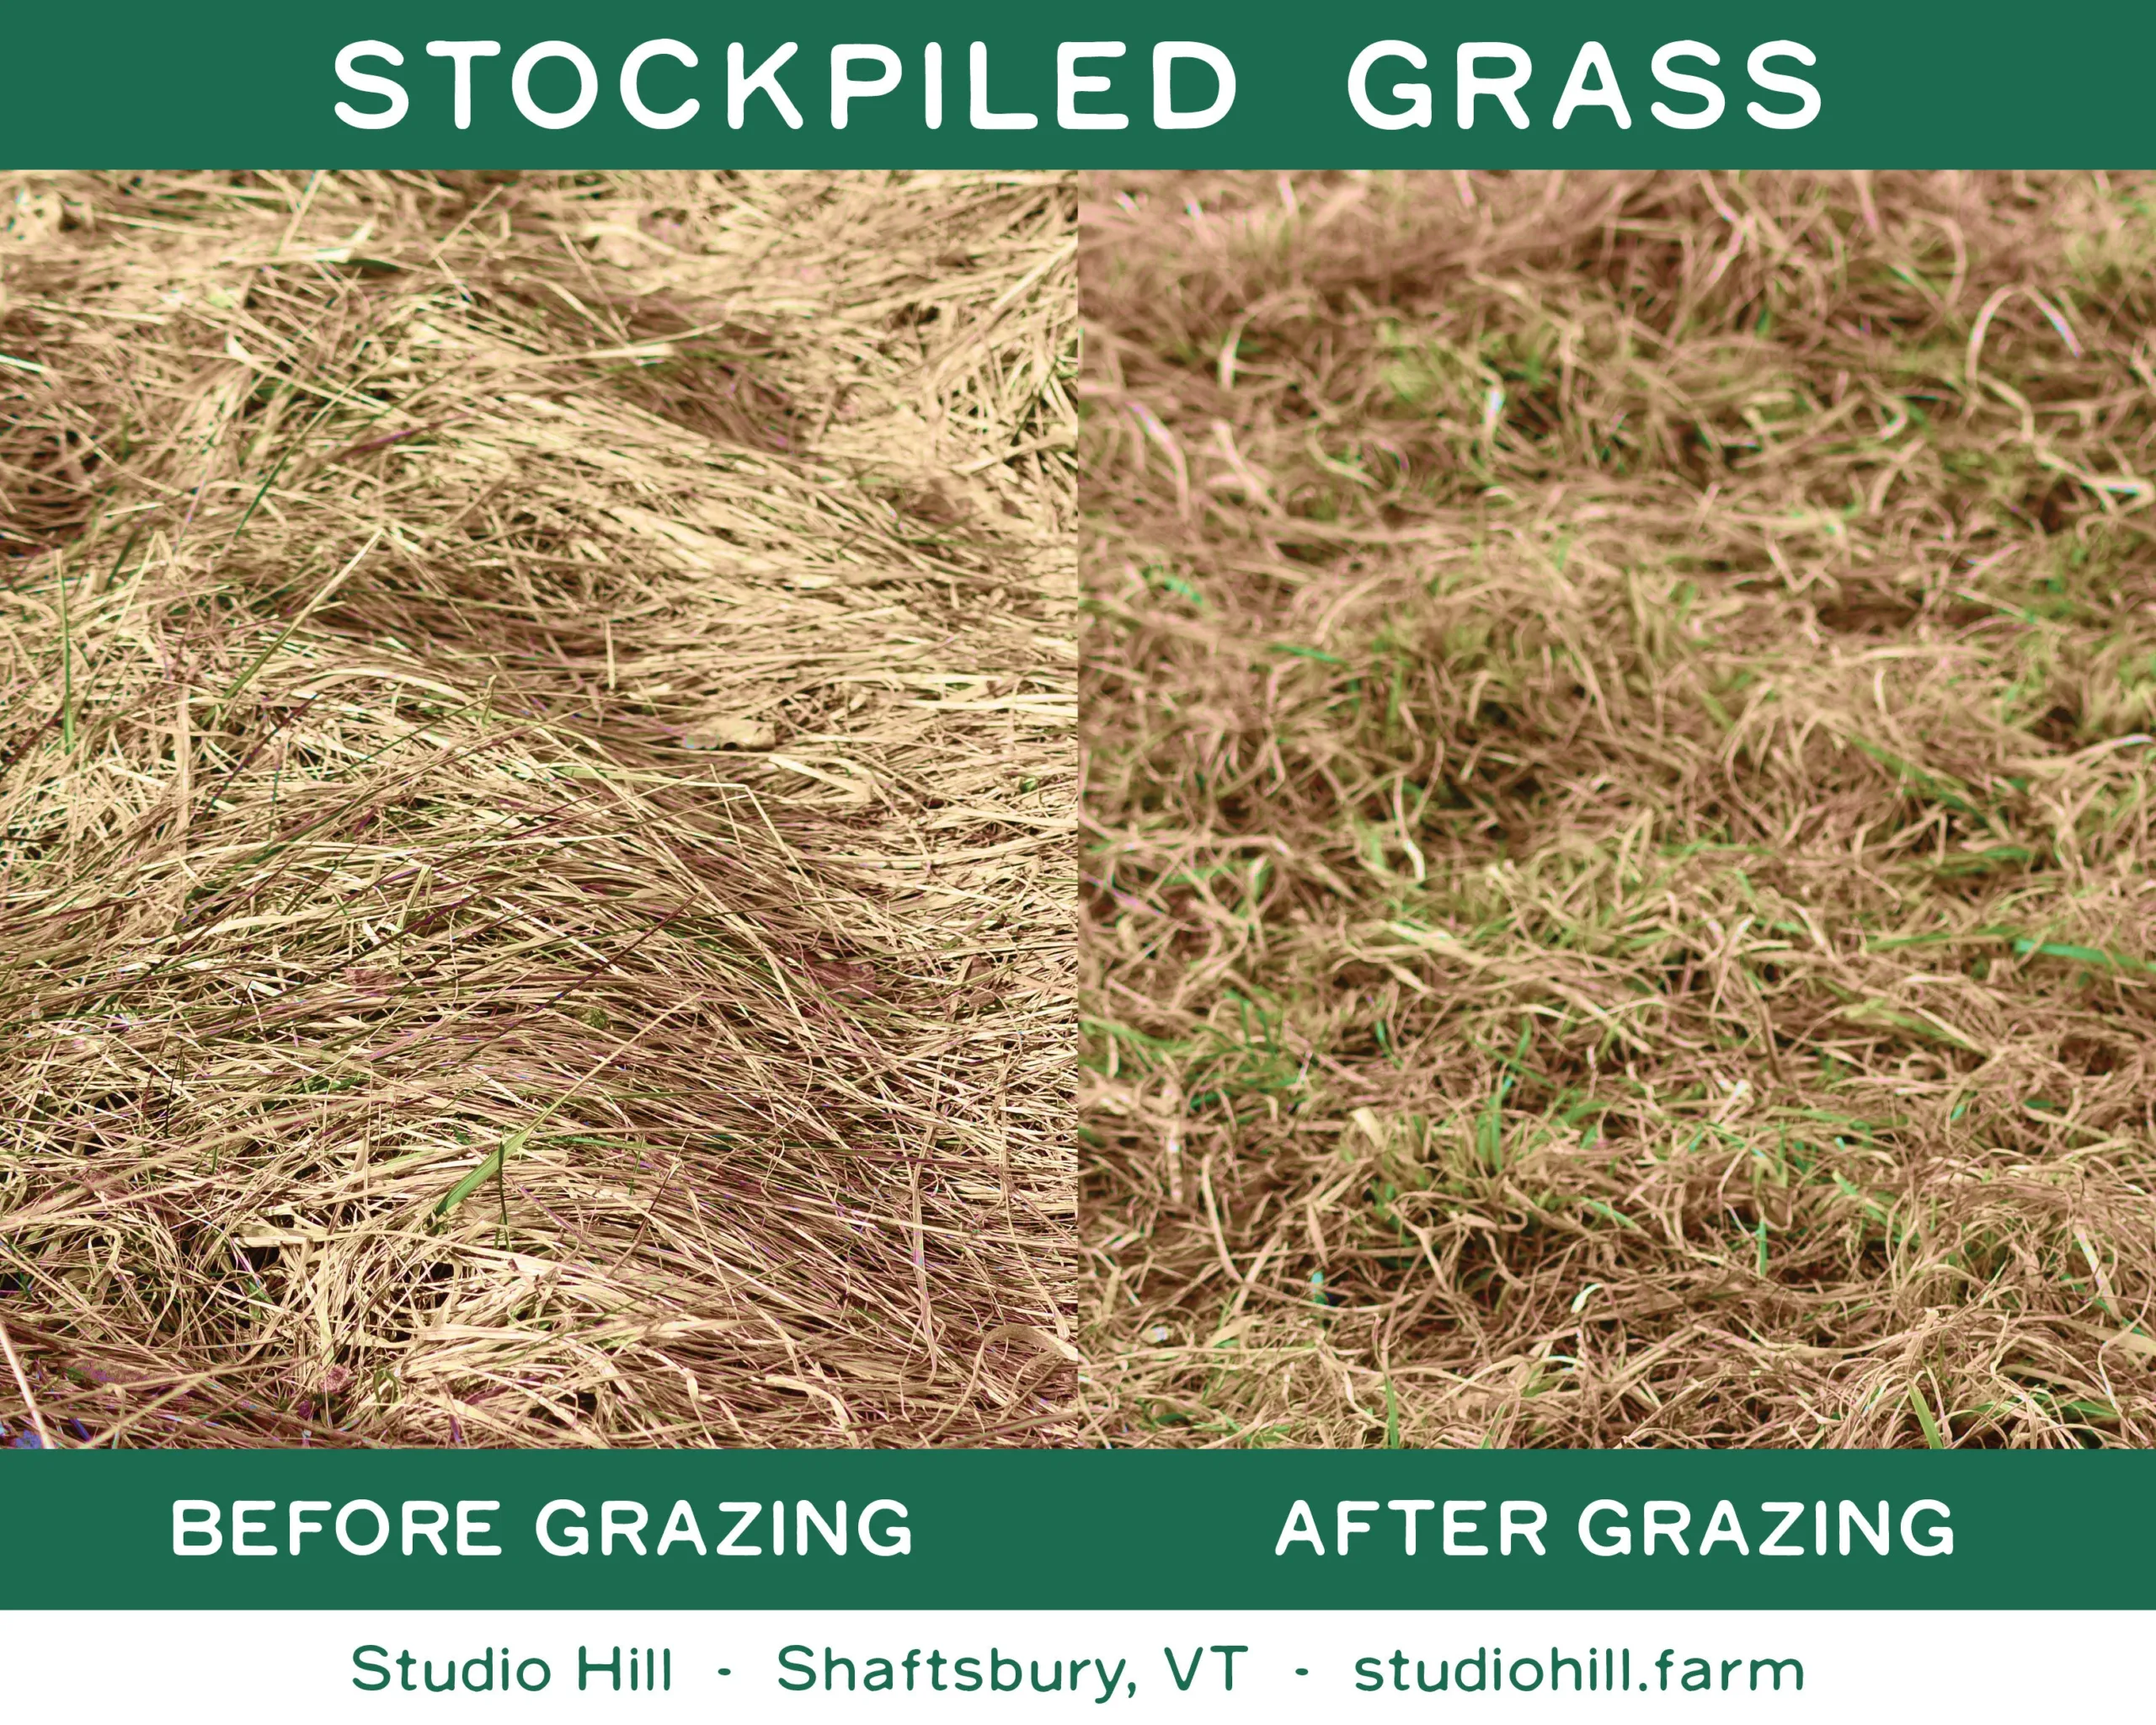 Stockpiling Grass for Early Spring Grazing